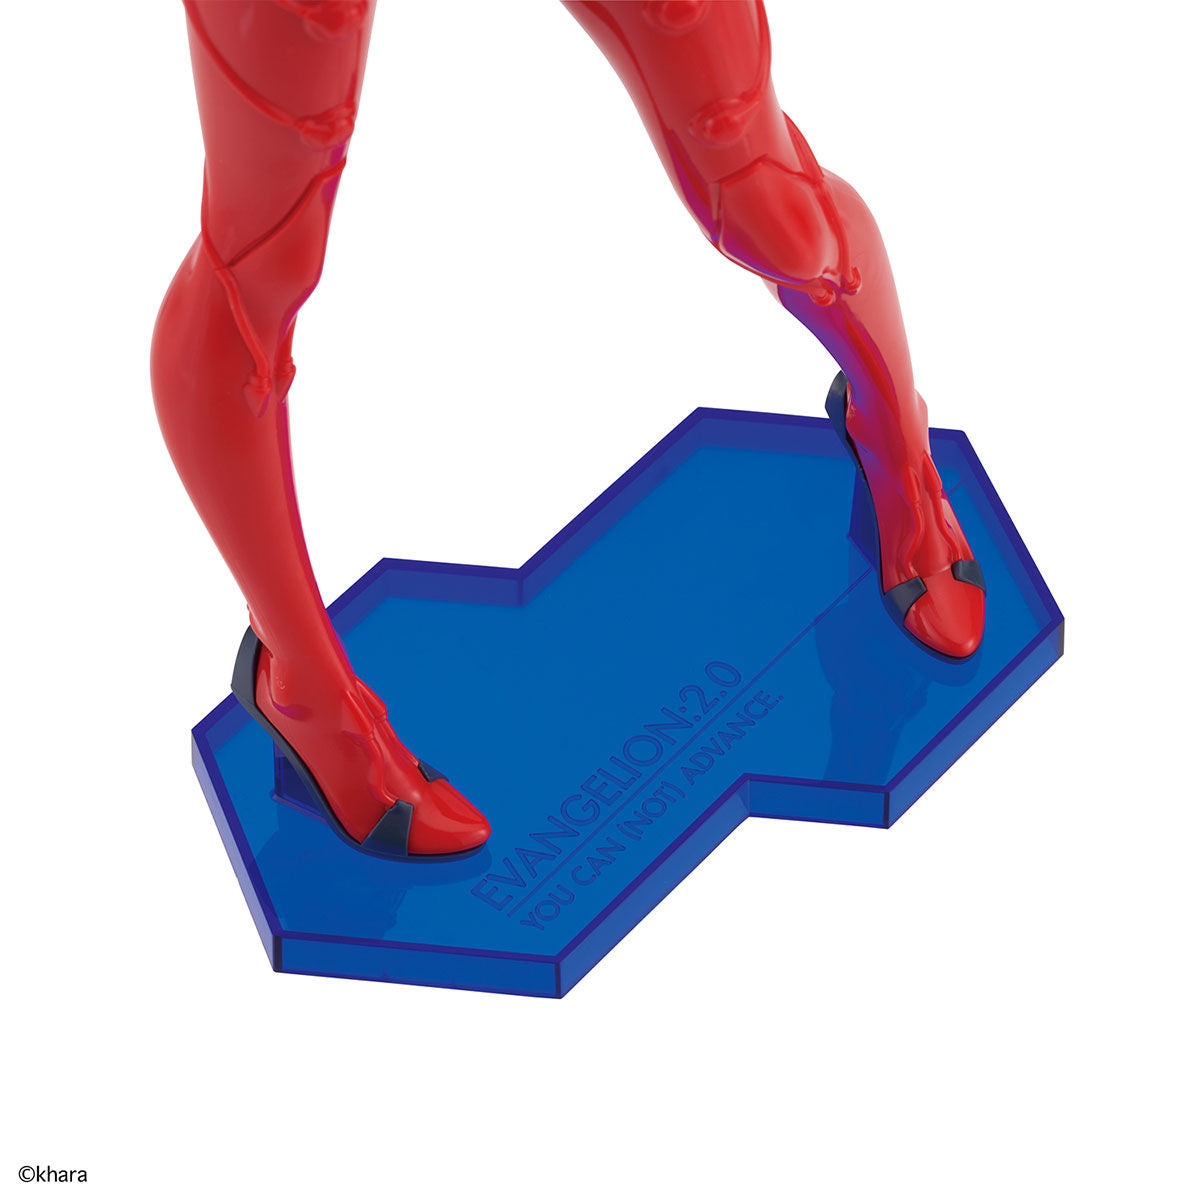 Evangelion - Soryu Asuka Langley - Figure-rise LABO (Bandai), Translucent suit that adheres to the skin, eye-tracking injection for realistic gaze, Nippon Figures